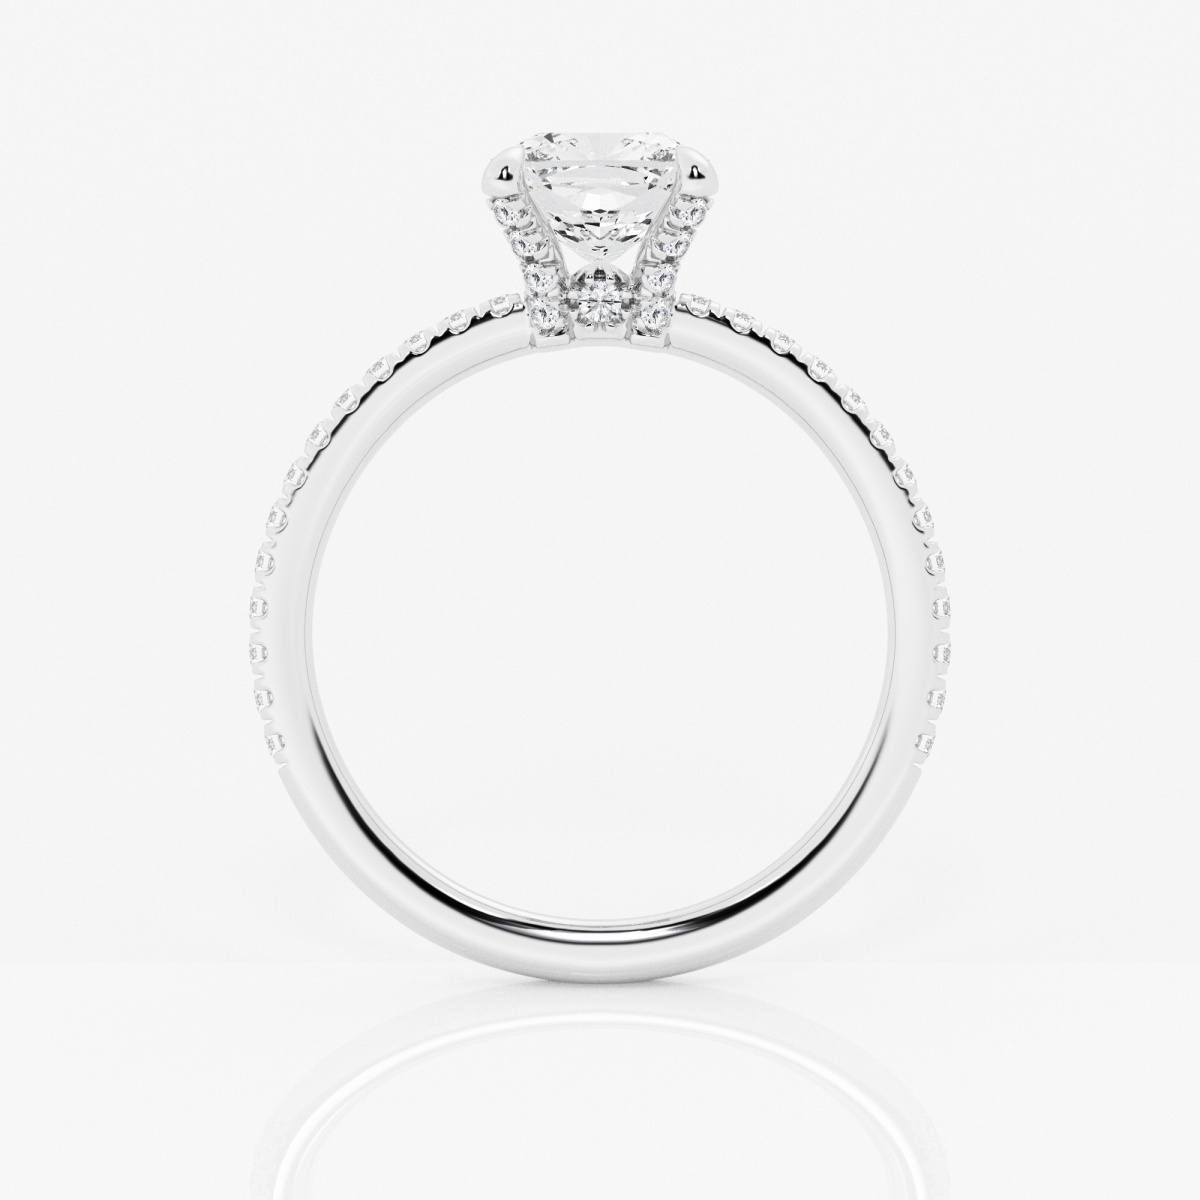 Additional Image 1 for  1 7/8 ctw Cushion Lab Grown Diamond Petite Pave Engagement Ring with Side Accents